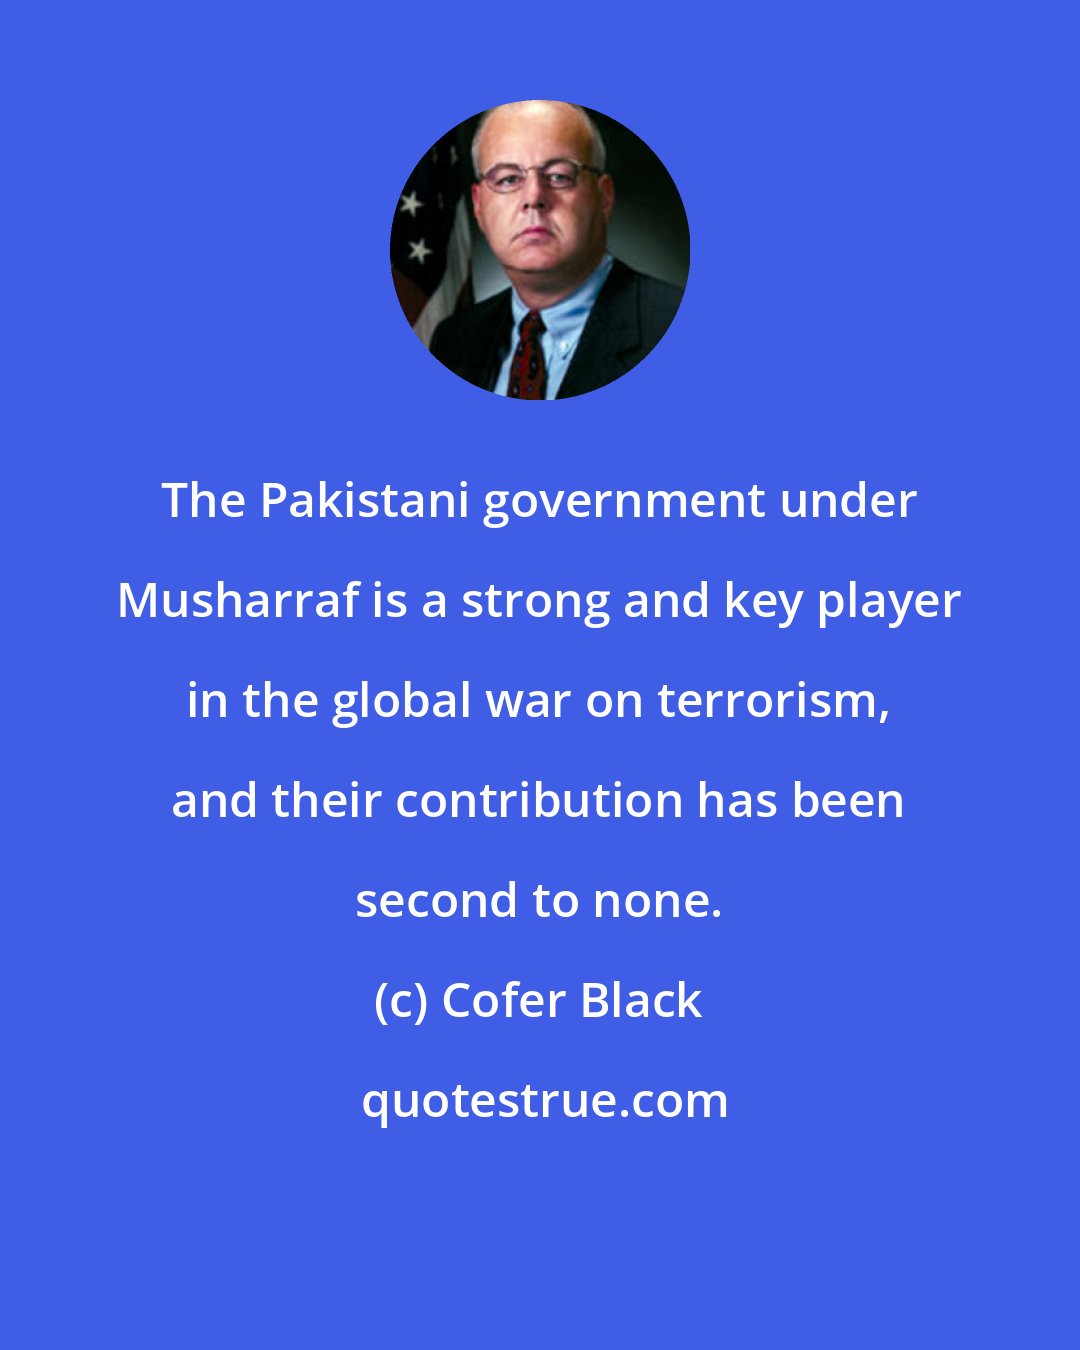 Cofer Black: The Pakistani government under Musharraf is a strong and key player in the global war on terrorism, and their contribution has been second to none.